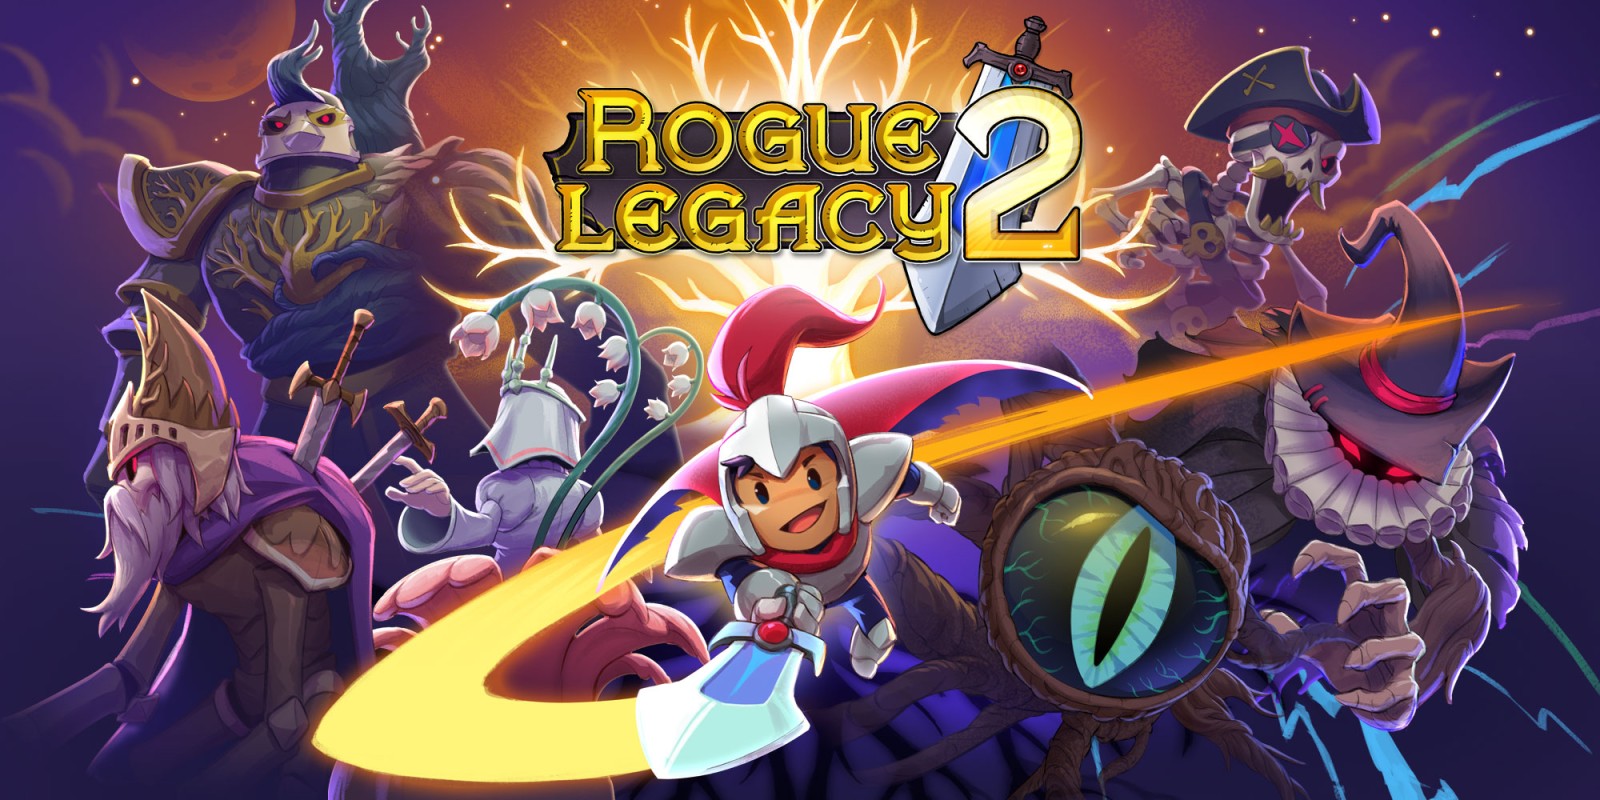 2x1_NSwitchDS_RogueLegacy2_image1600w.jpg